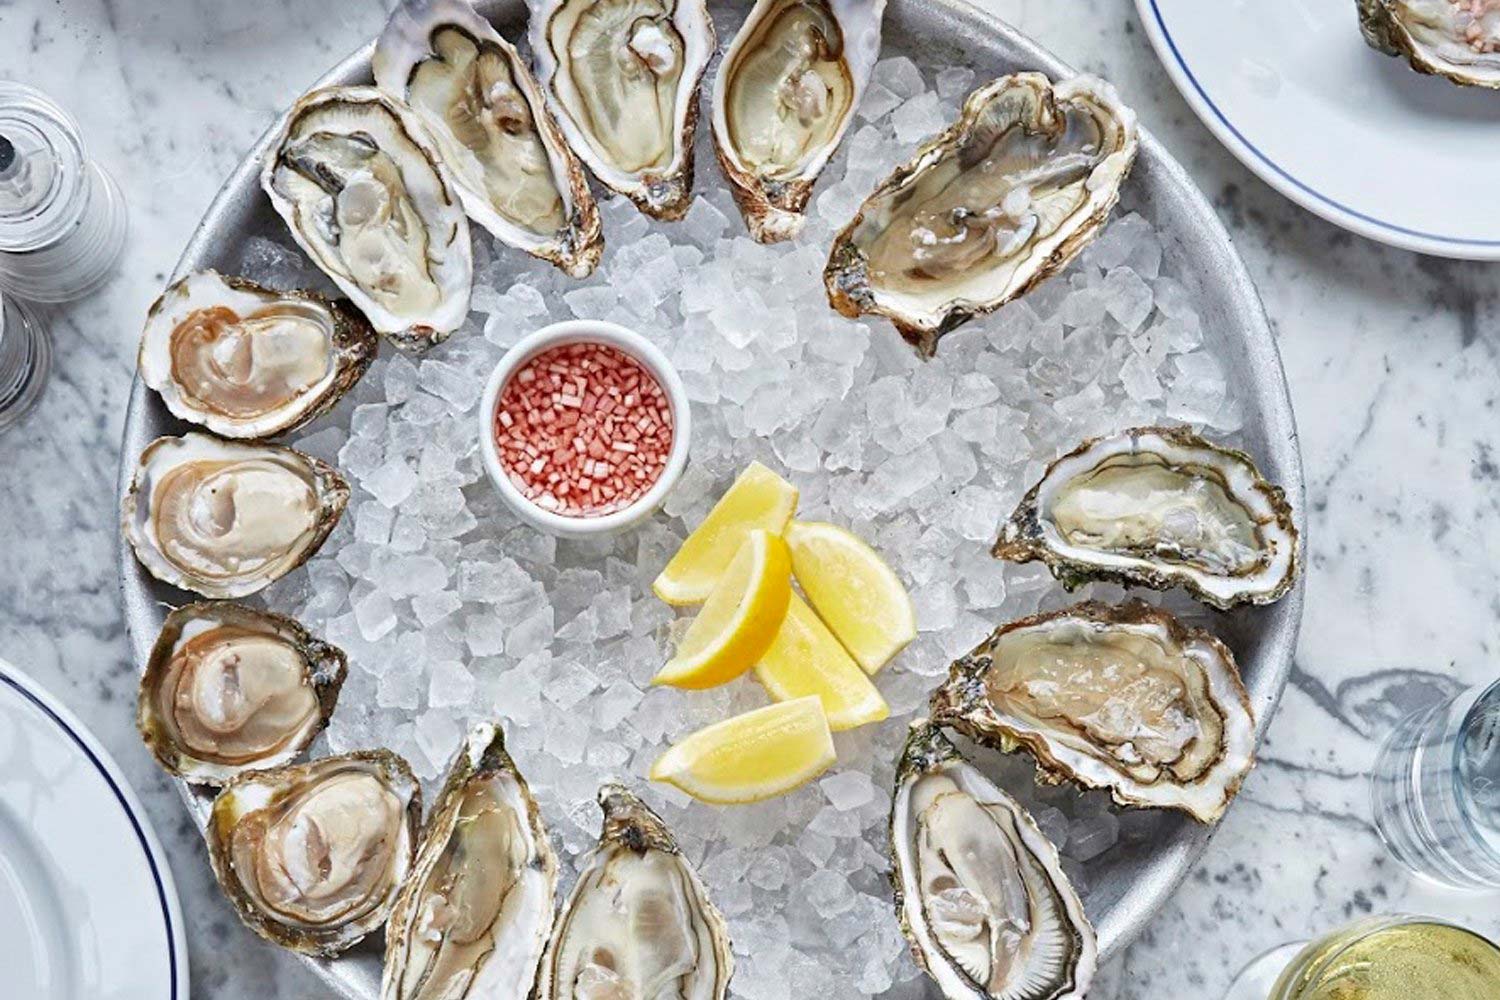 💖 If You Like Eating 27/35 of These Aphrodisiacs, You’re a 🥰 Real Romantic Oysters